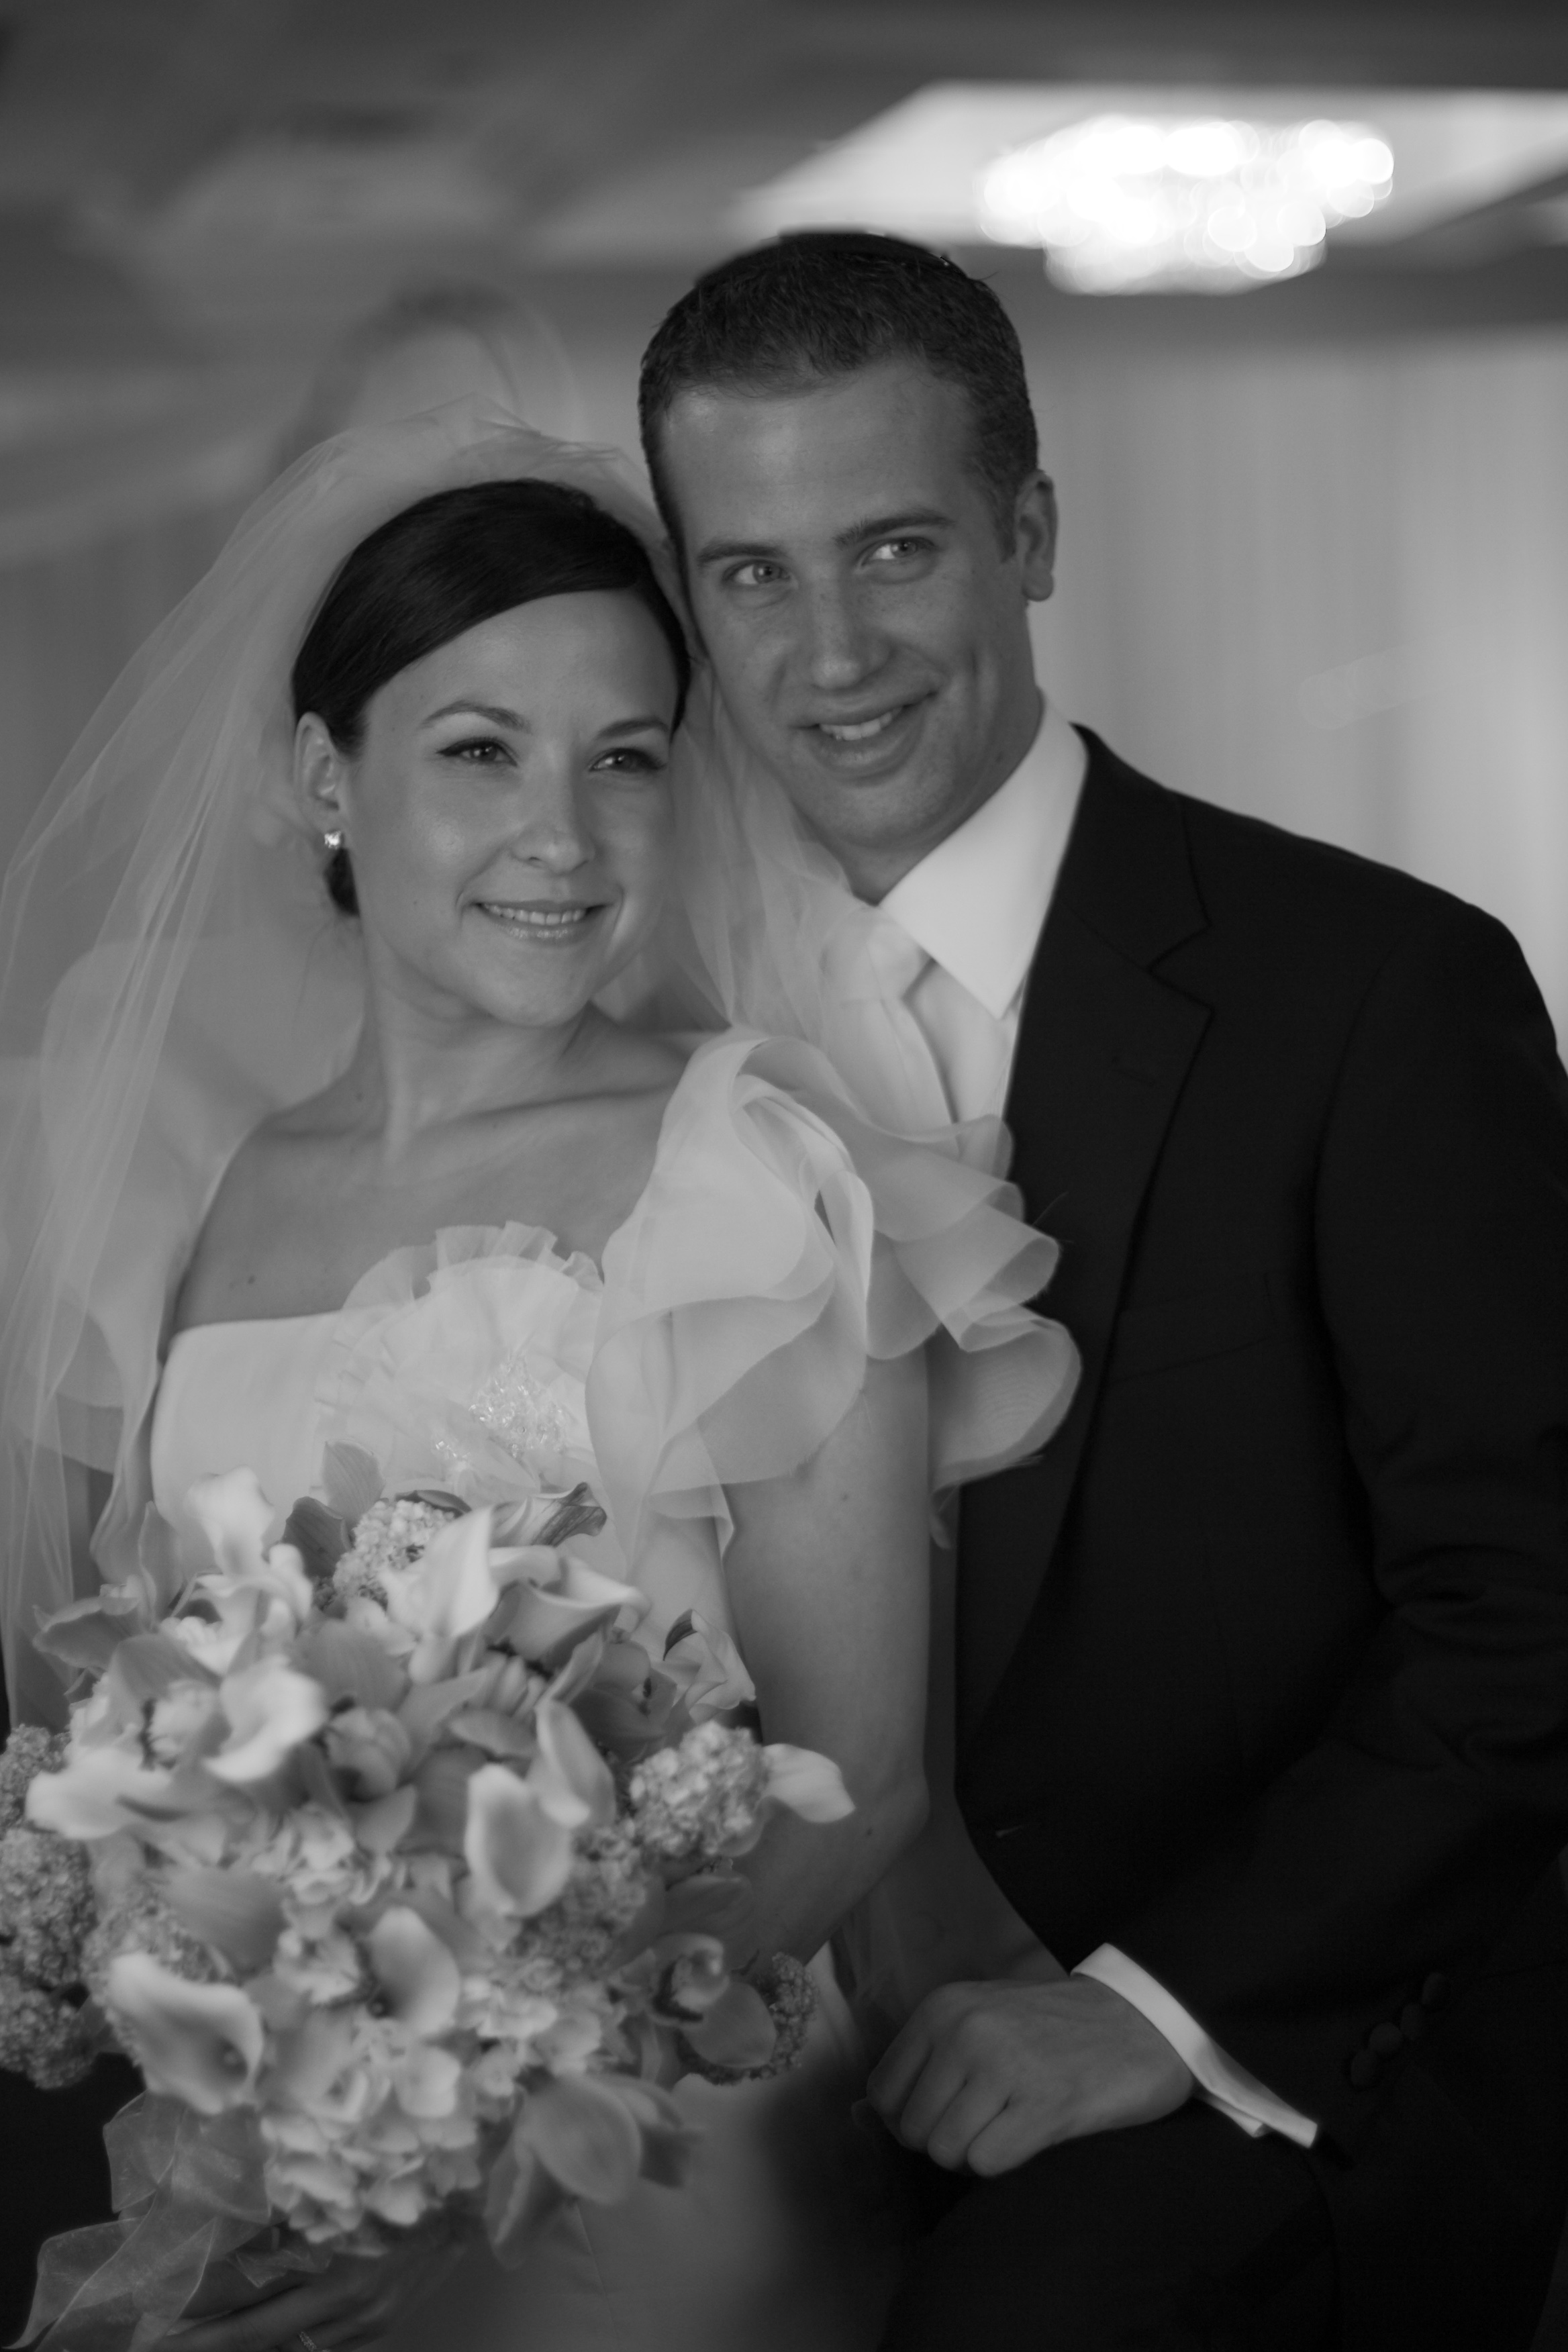 Ours founder, Tali, and her husband at their wedding 10 years ago.